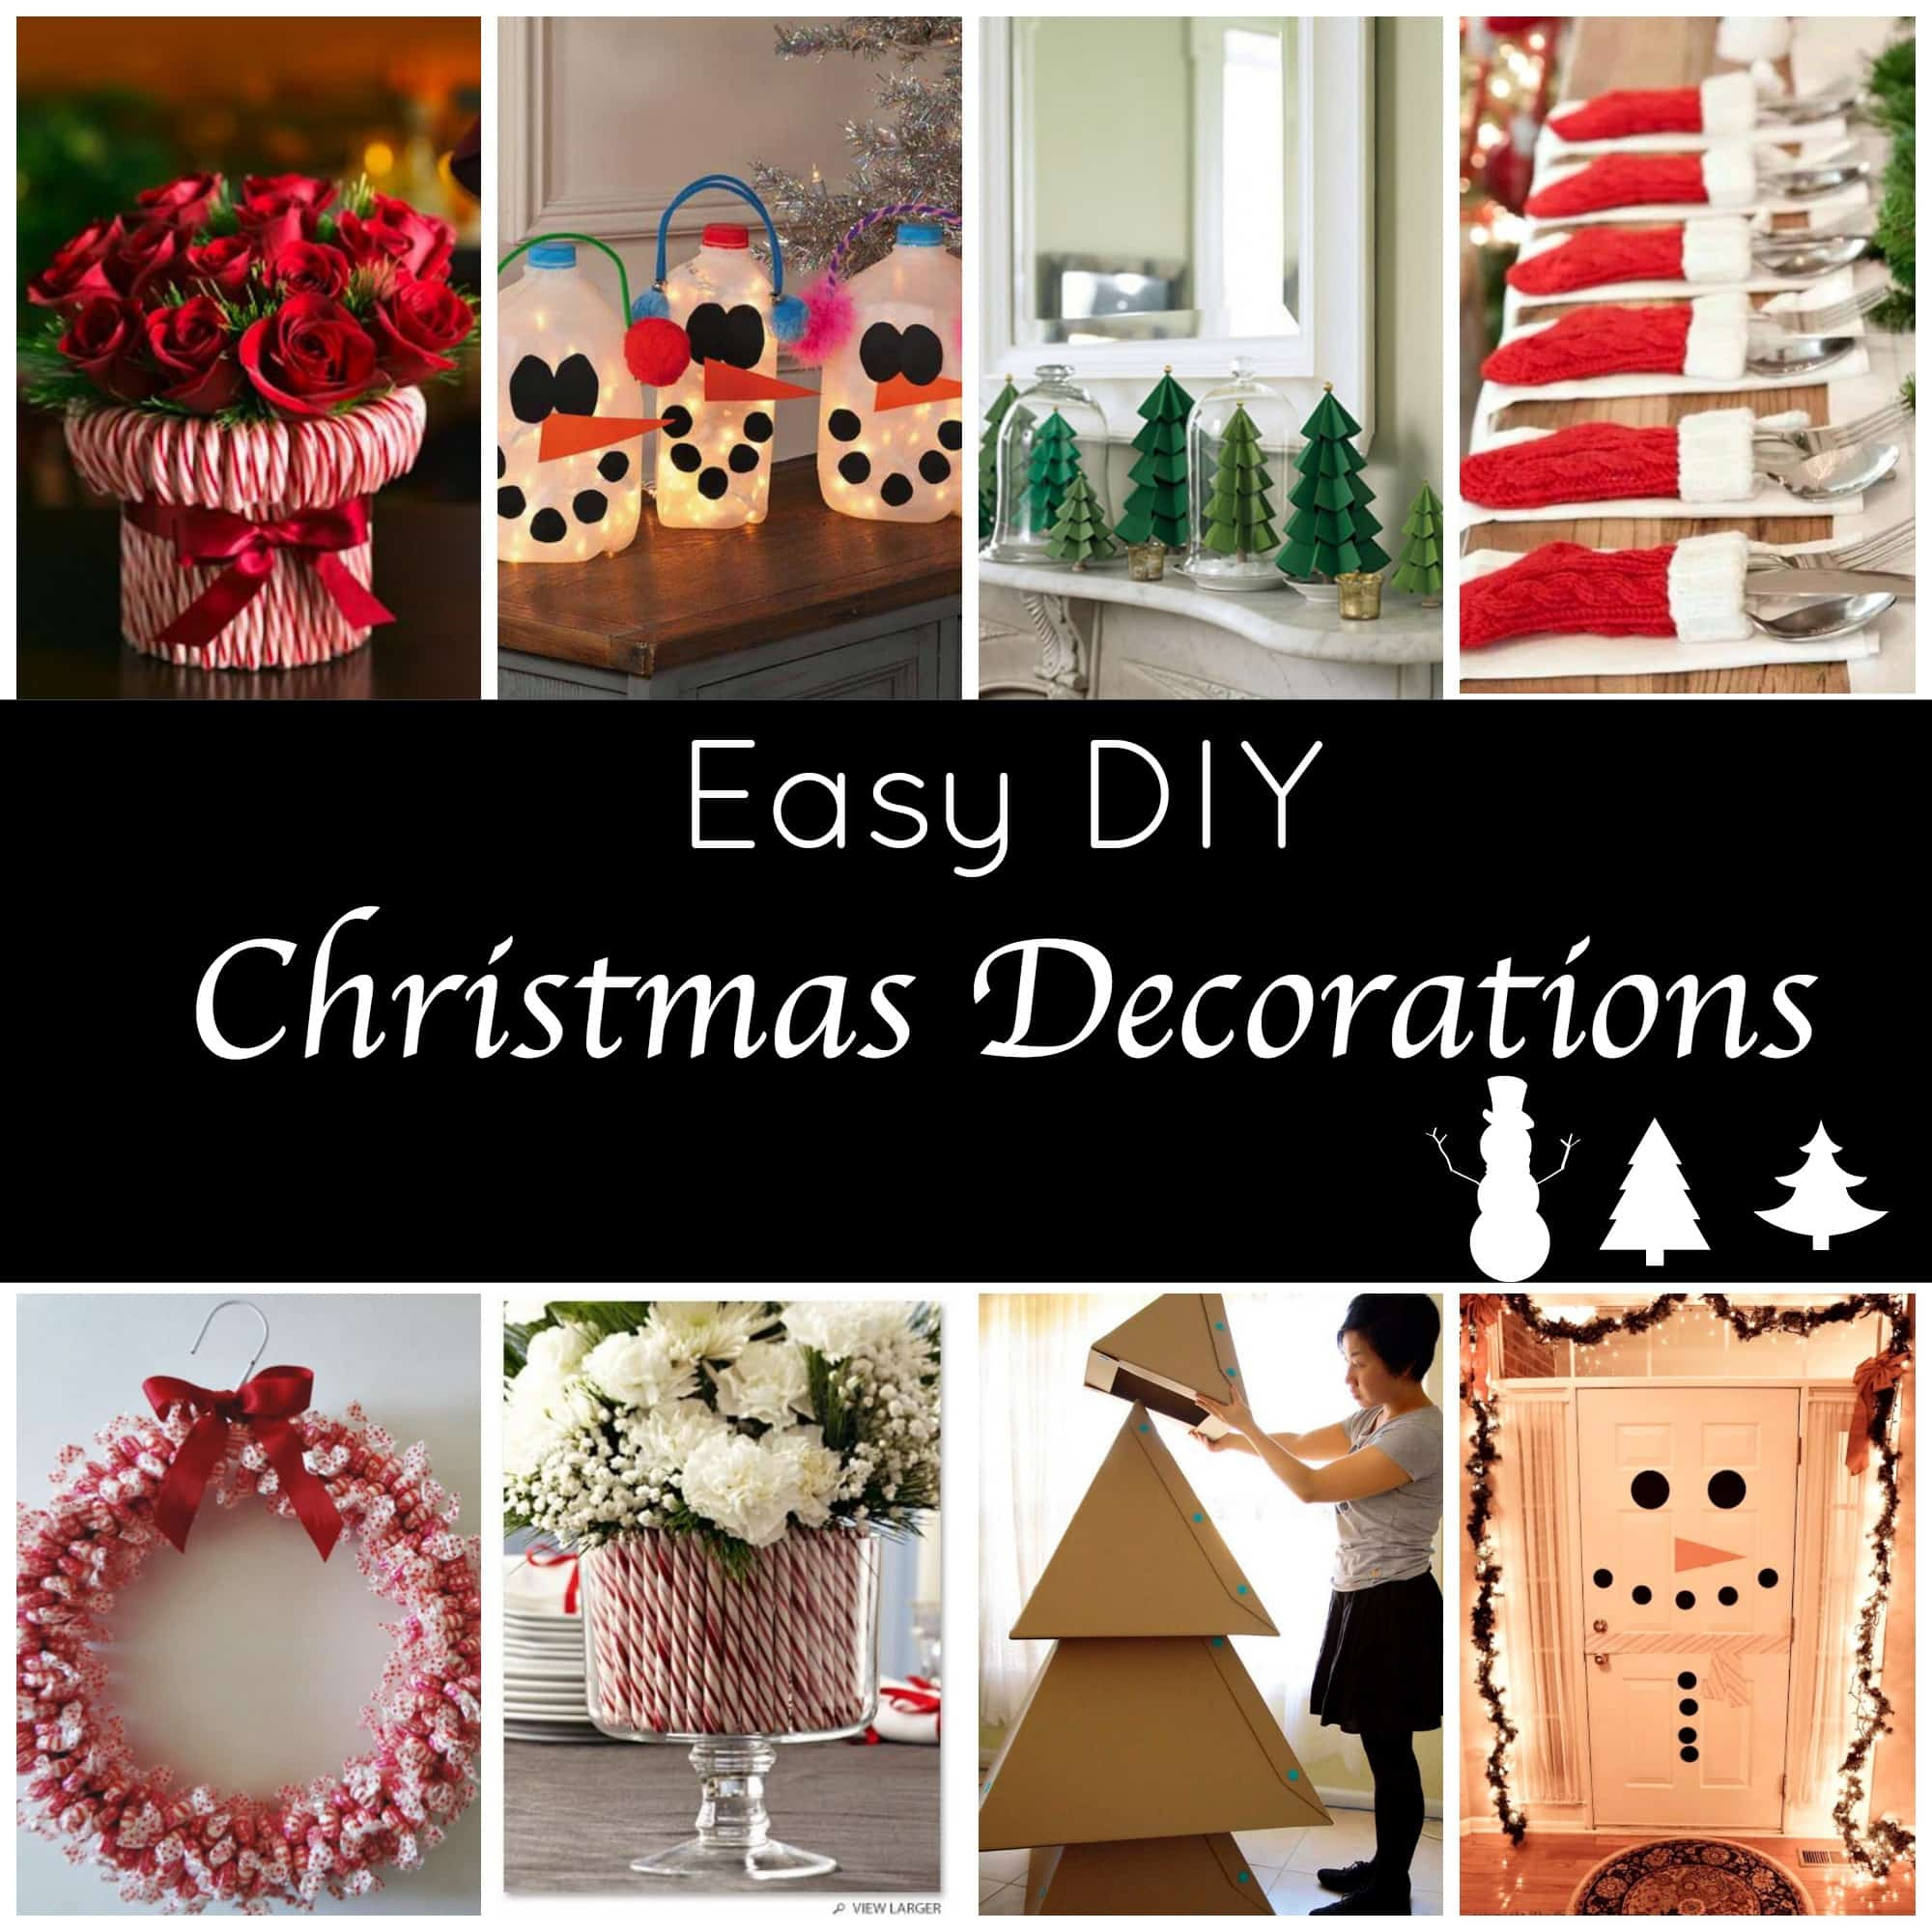 DIY Holiday Decorations Ideas
 Cute & Easy Holiday Decorations Page 2 of 2 Princess